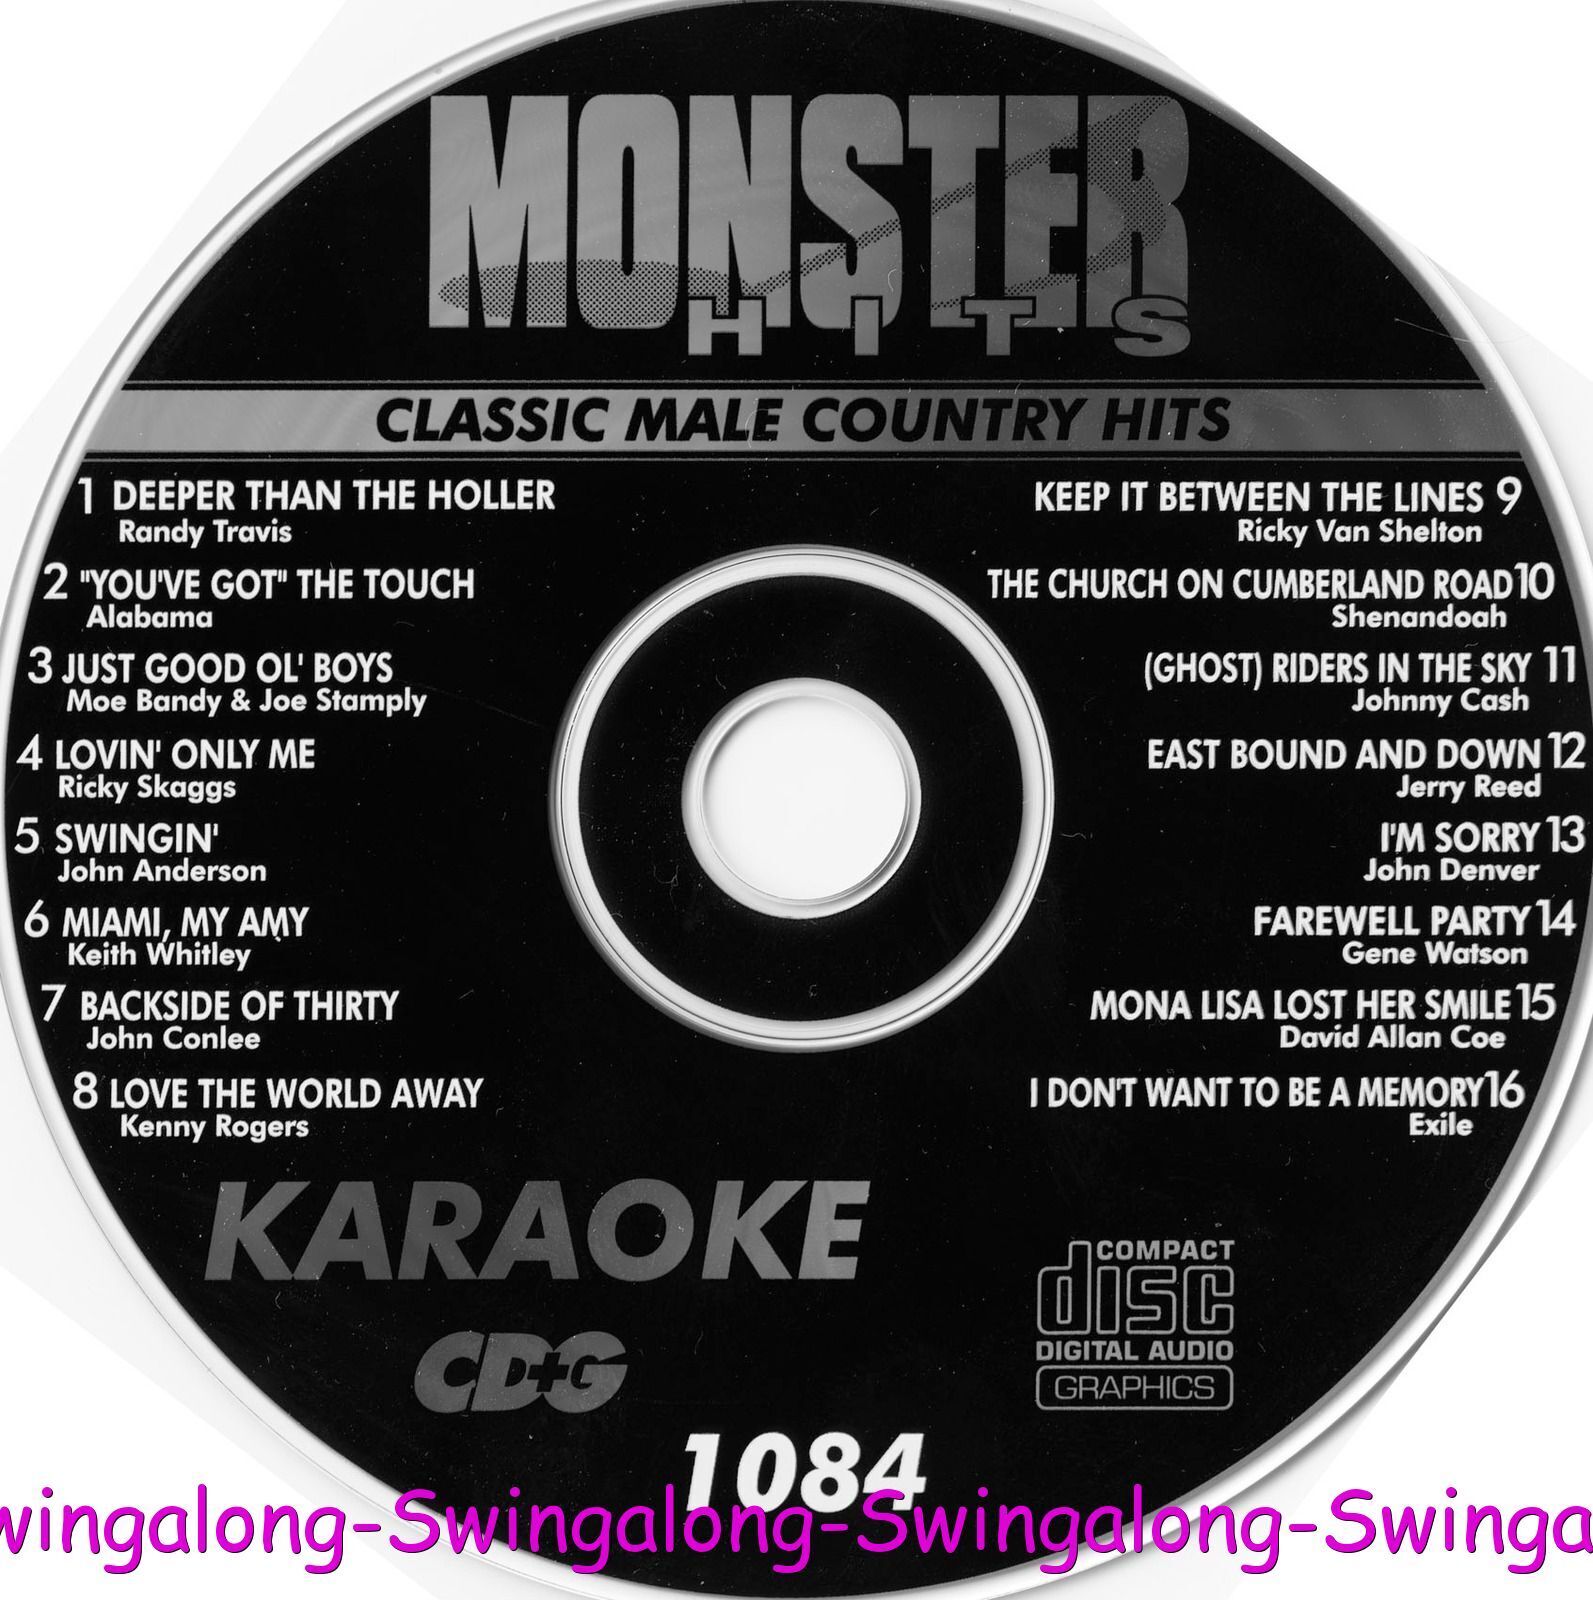 Classic Male Country Monster Hits Karaoke Cd+g Vol-1084 New In White Sleeves